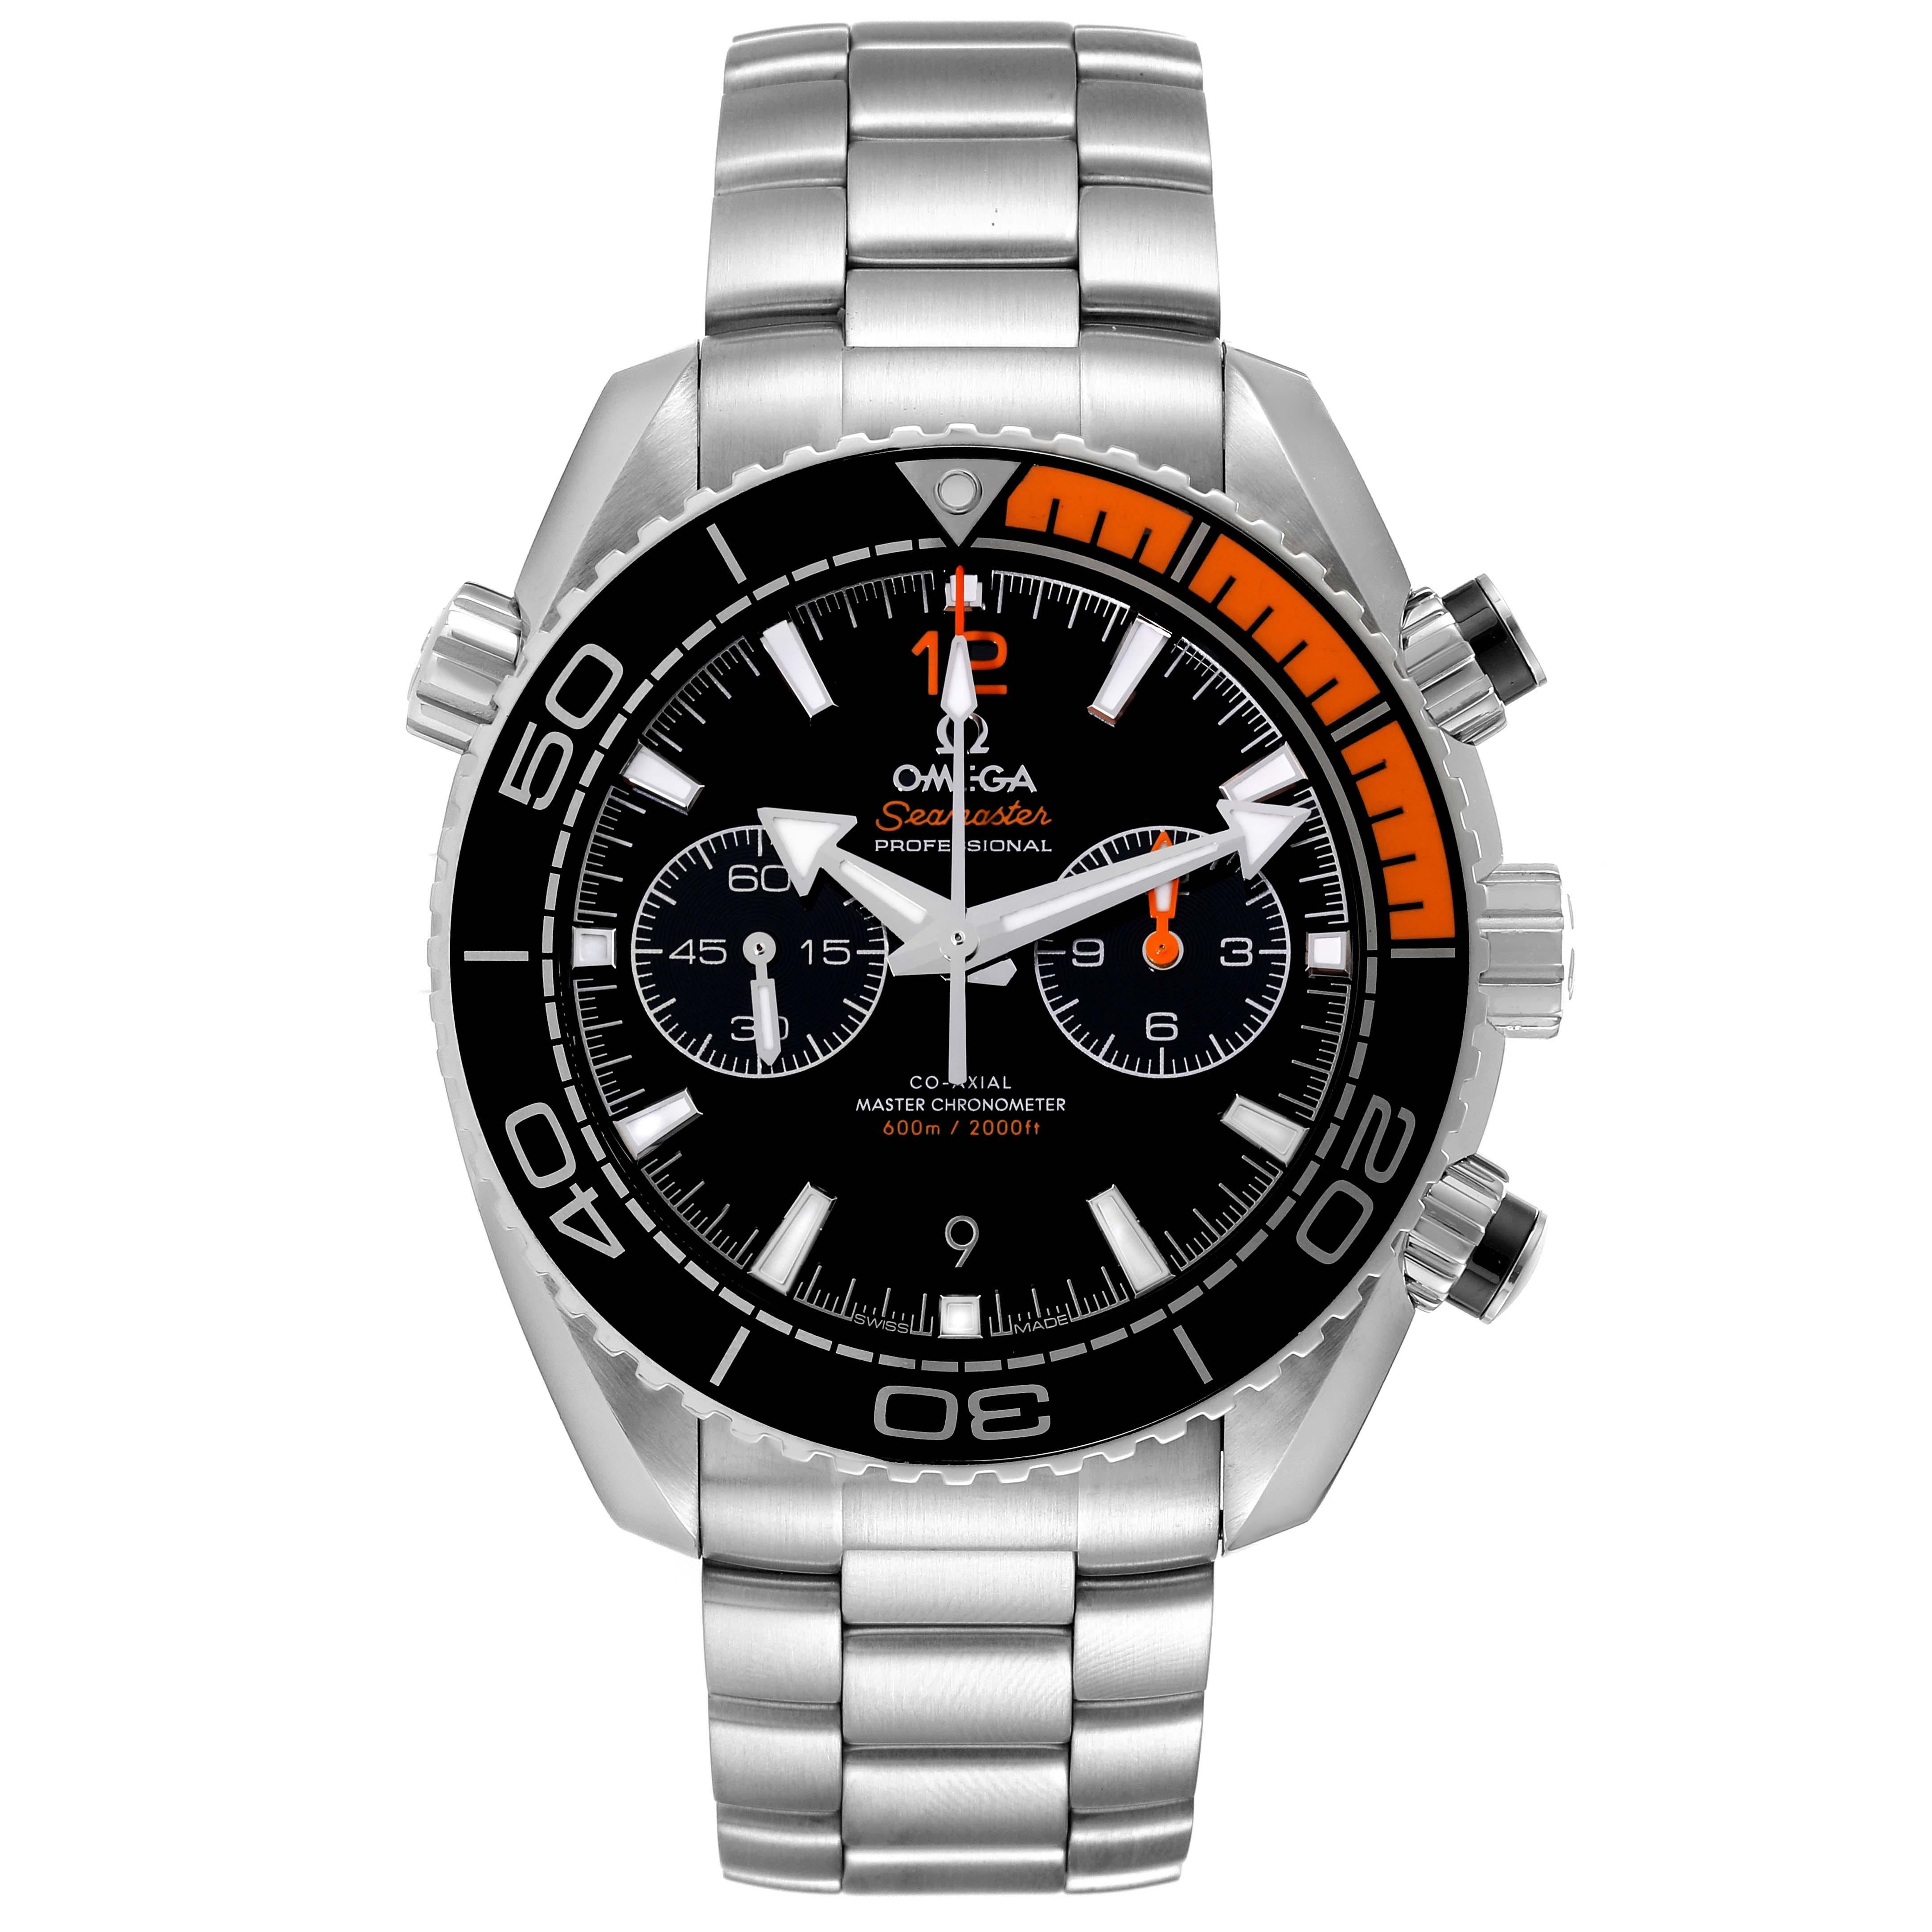 Omega Seamaster Chronograph Steel Mens Watch 215.30.46.51.01.002 Box Card. Self-winding chronograph with column wheel and Co-Axial escapement. Certified Master Chronometer, approved by METAS, resistant to magnetic fields reaching 15,000 gauss.